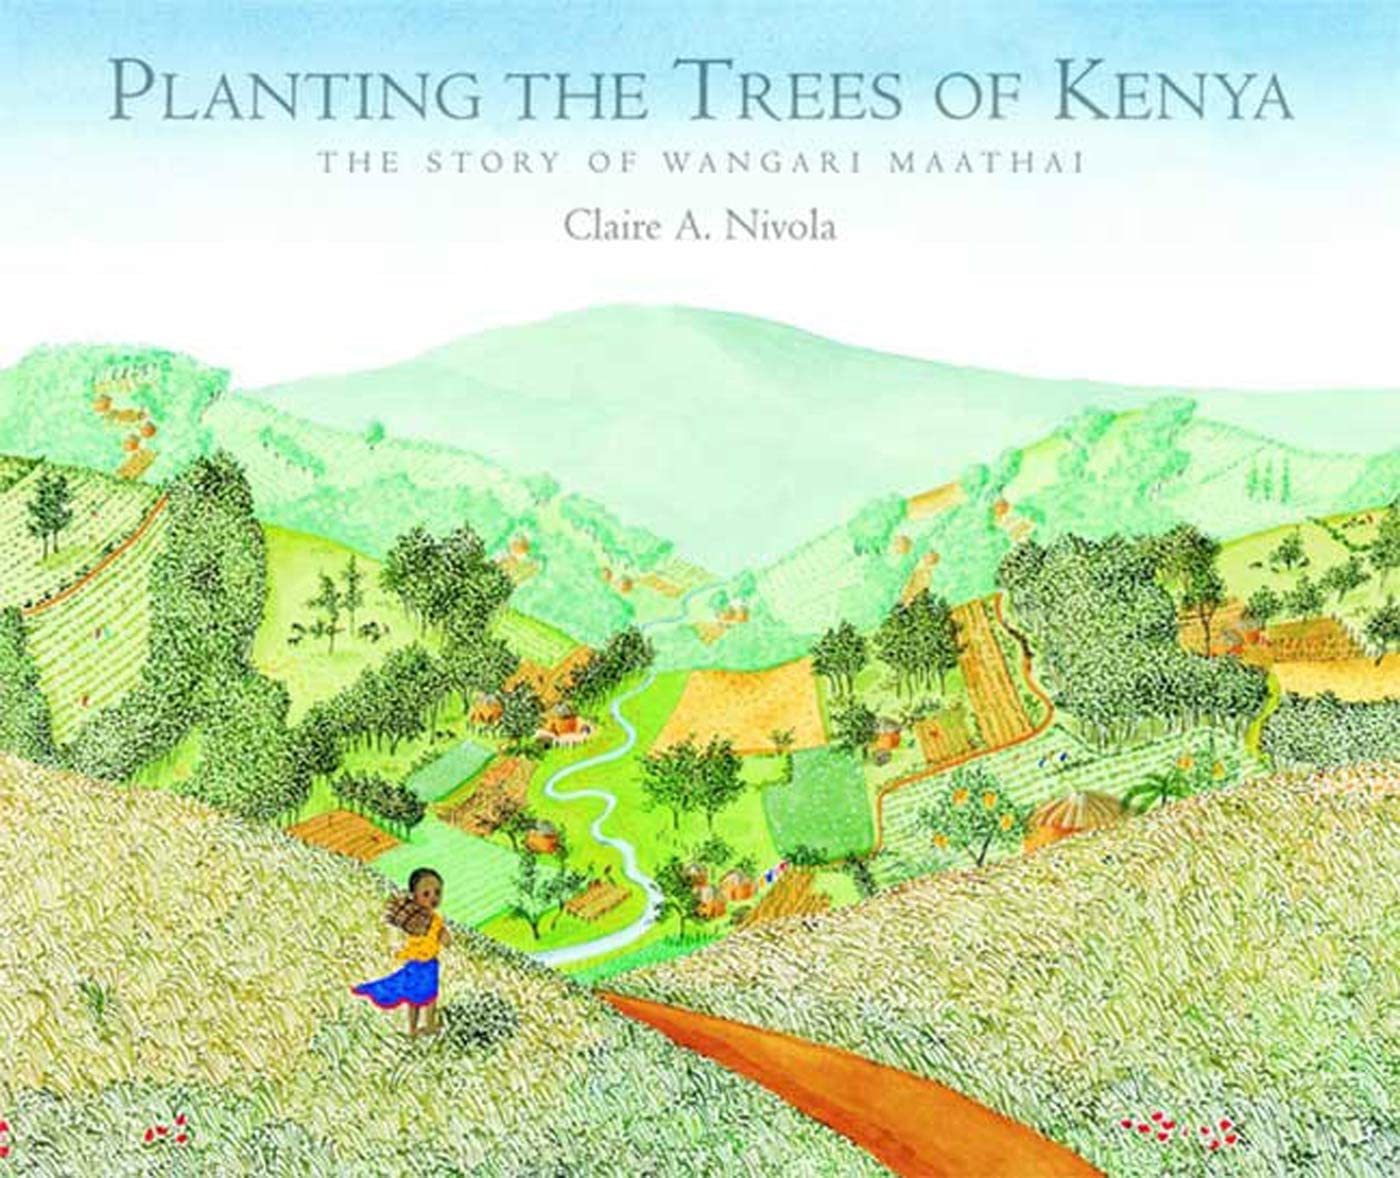 Image for "Planting the Trees of Kenya"